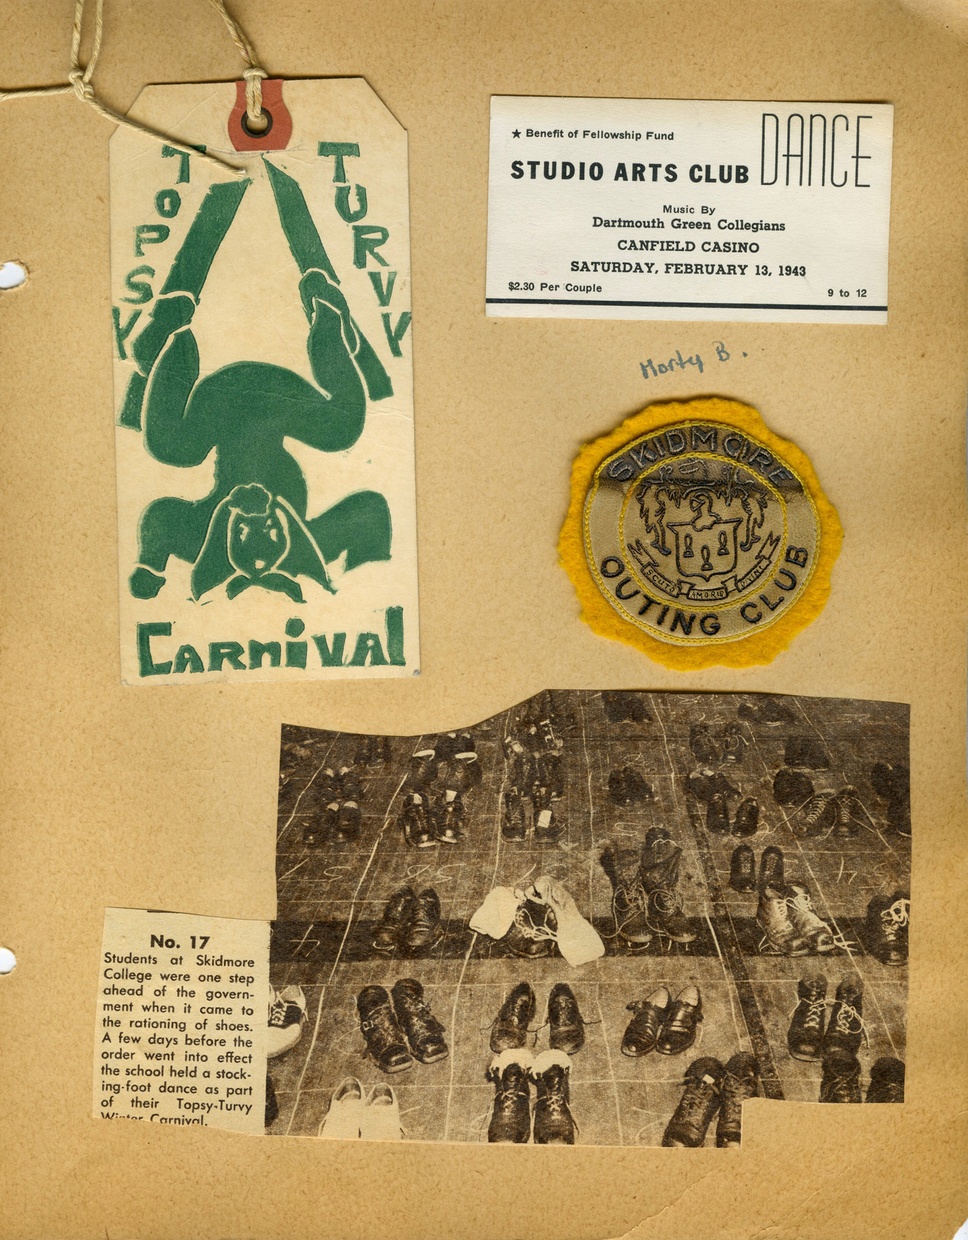 A yellowed scrapbook page shows many small objects on it. On the bottom right is a newspaper cutting with a photograph of many pairs of shoes spread out on a large floor.